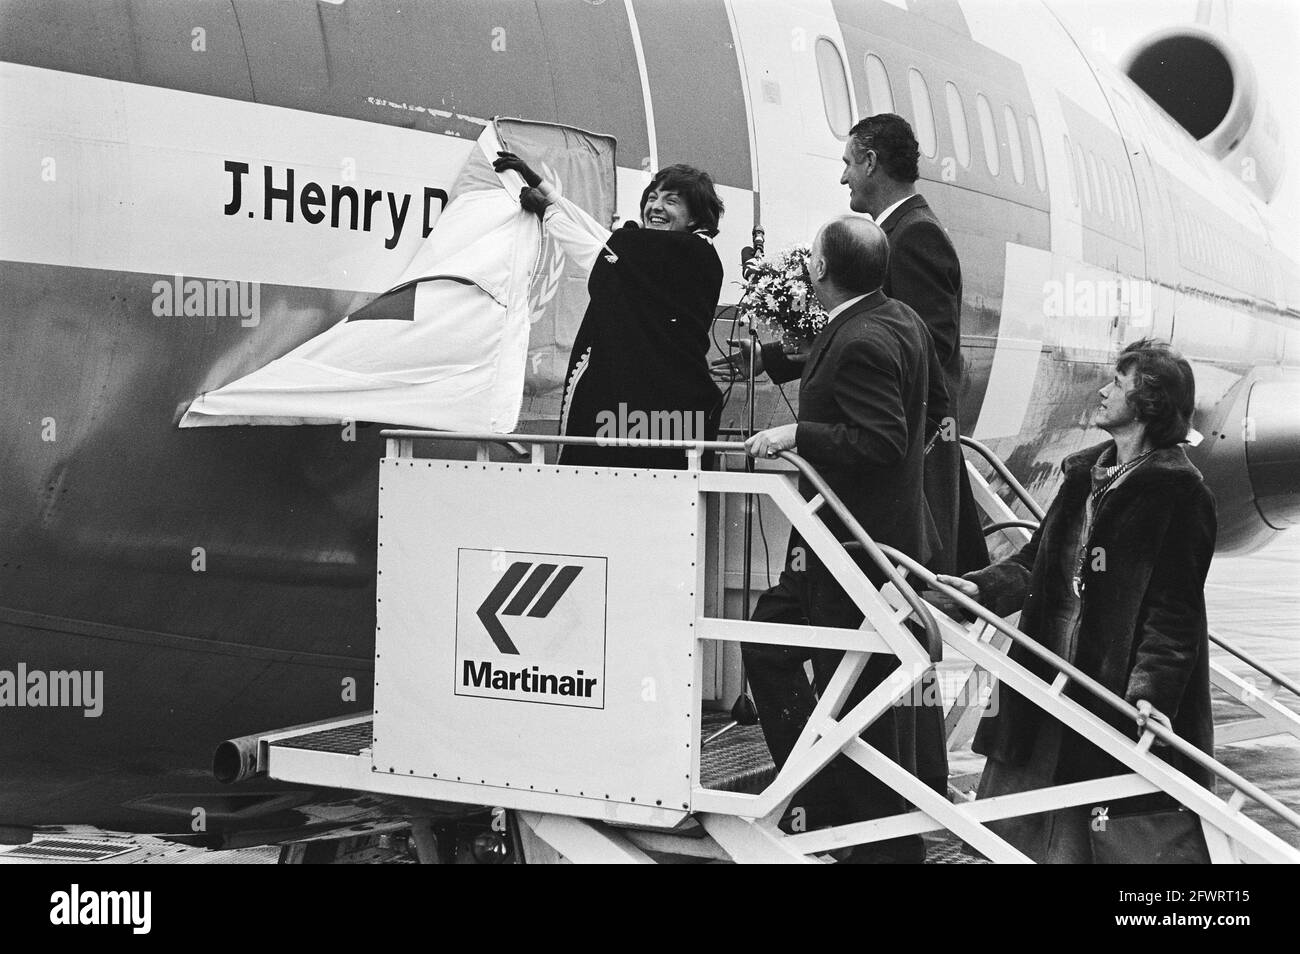 Princess Margriet during the name unveiling; the DC-10 is used for cargo transport of relief goods to Cambodia; behind the princess Gualtherus [Guup] baron Kraijenhoff, chairman of the Dutch Red Cross (l) Martin Schröder, director of Martinair, November 23, 1979, directors, princesses, rituals, aircraft, The Netherlands, 20th century press agency photo, news to remember, documentary, historic photography 1945-1990, visual stories, human history of the Twentieth Century, capturing moments in time Stock Photo